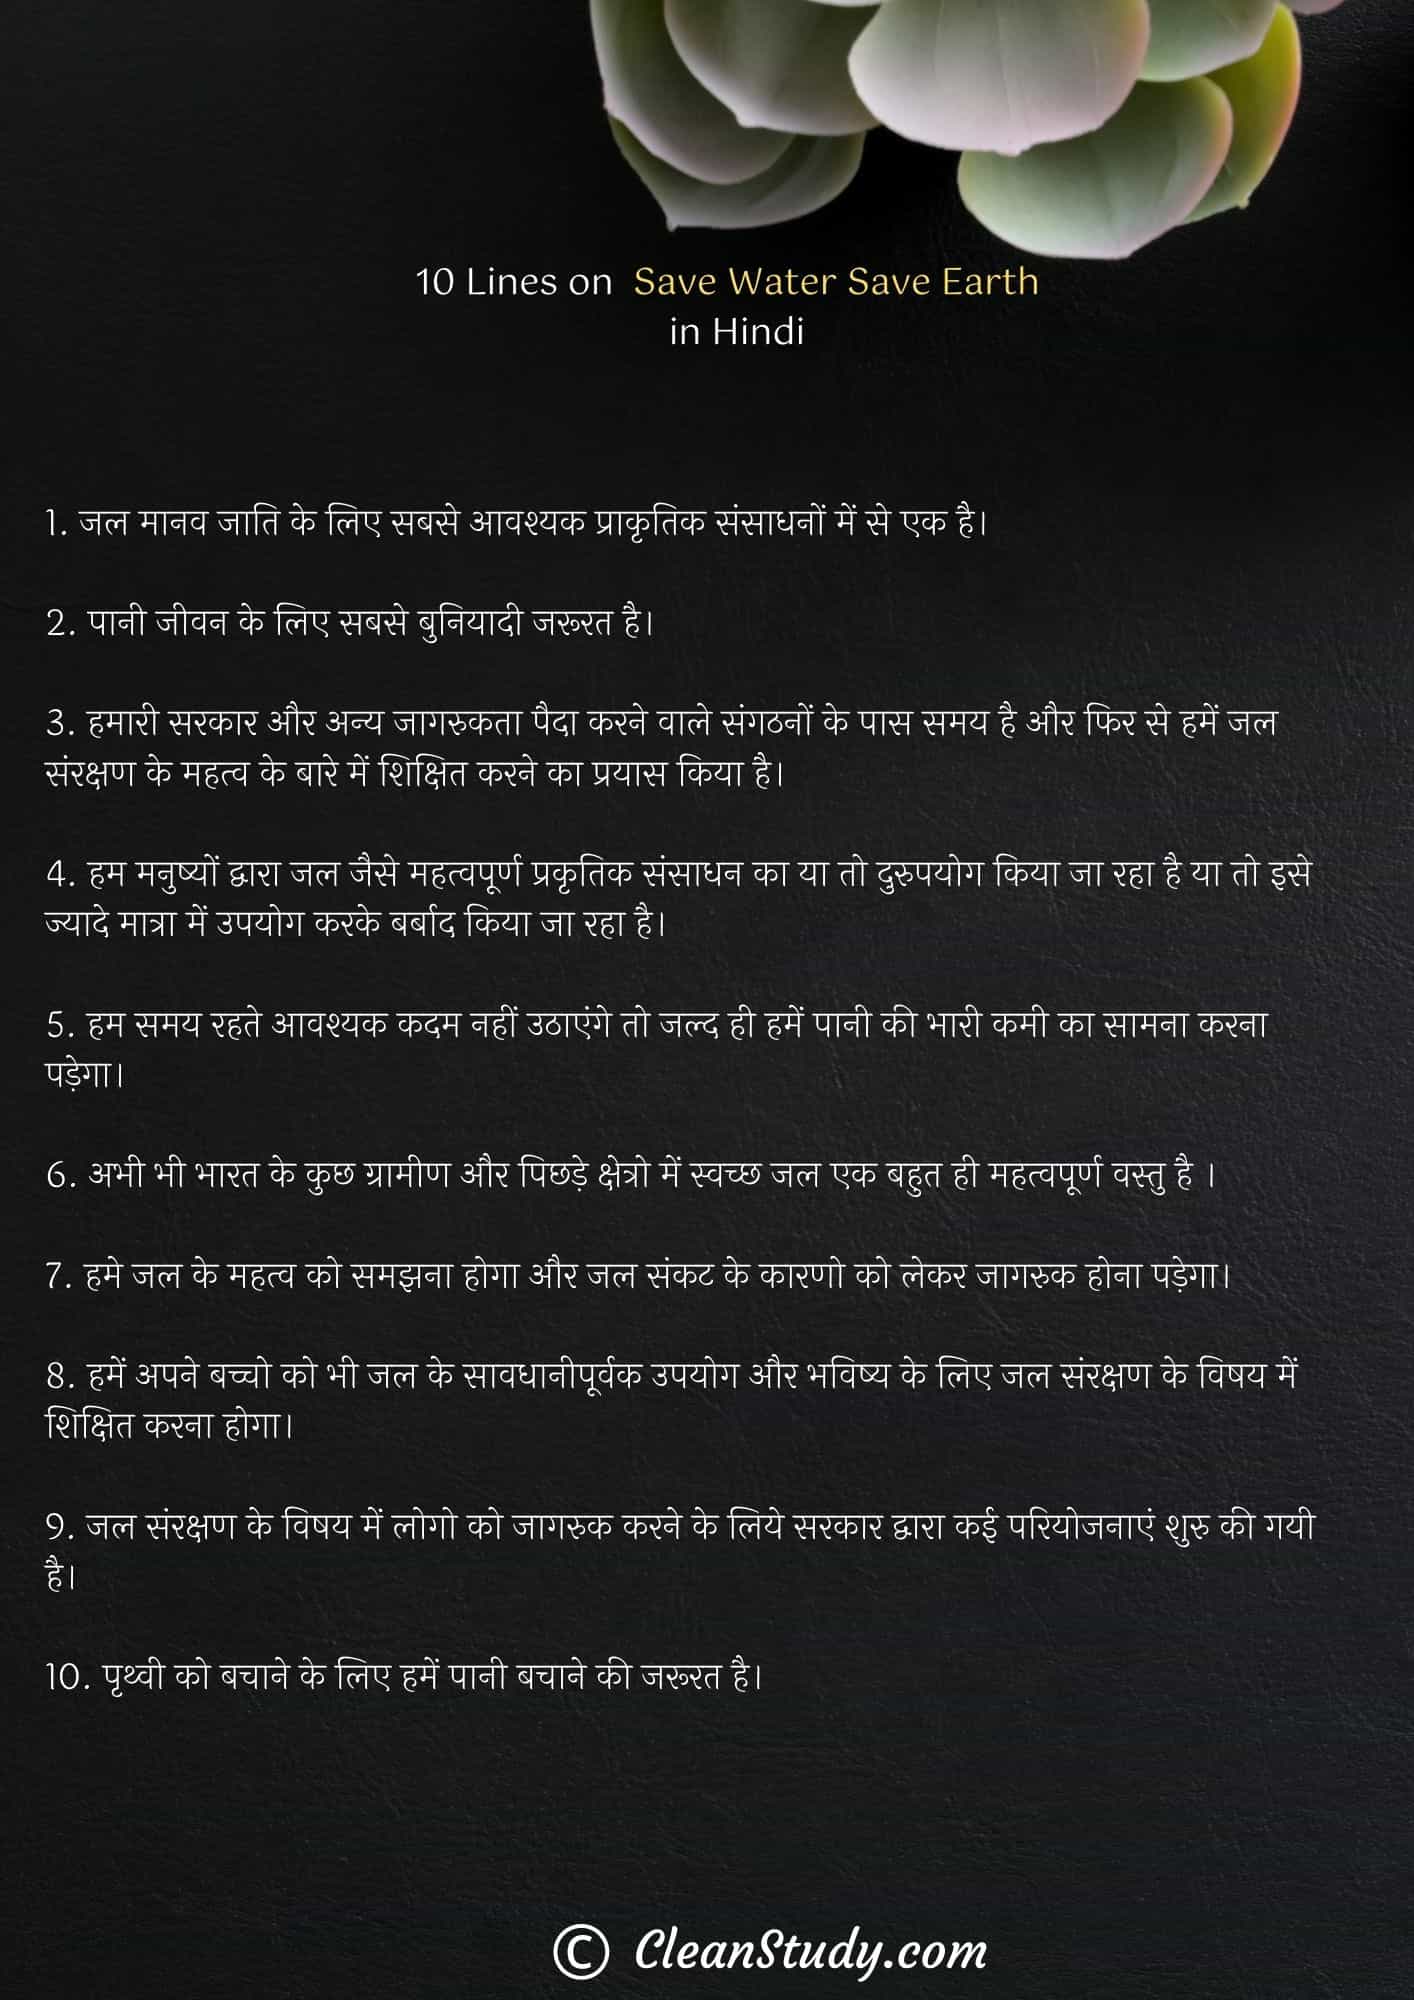 10 Lines on Save Water Save Earth in Hindi